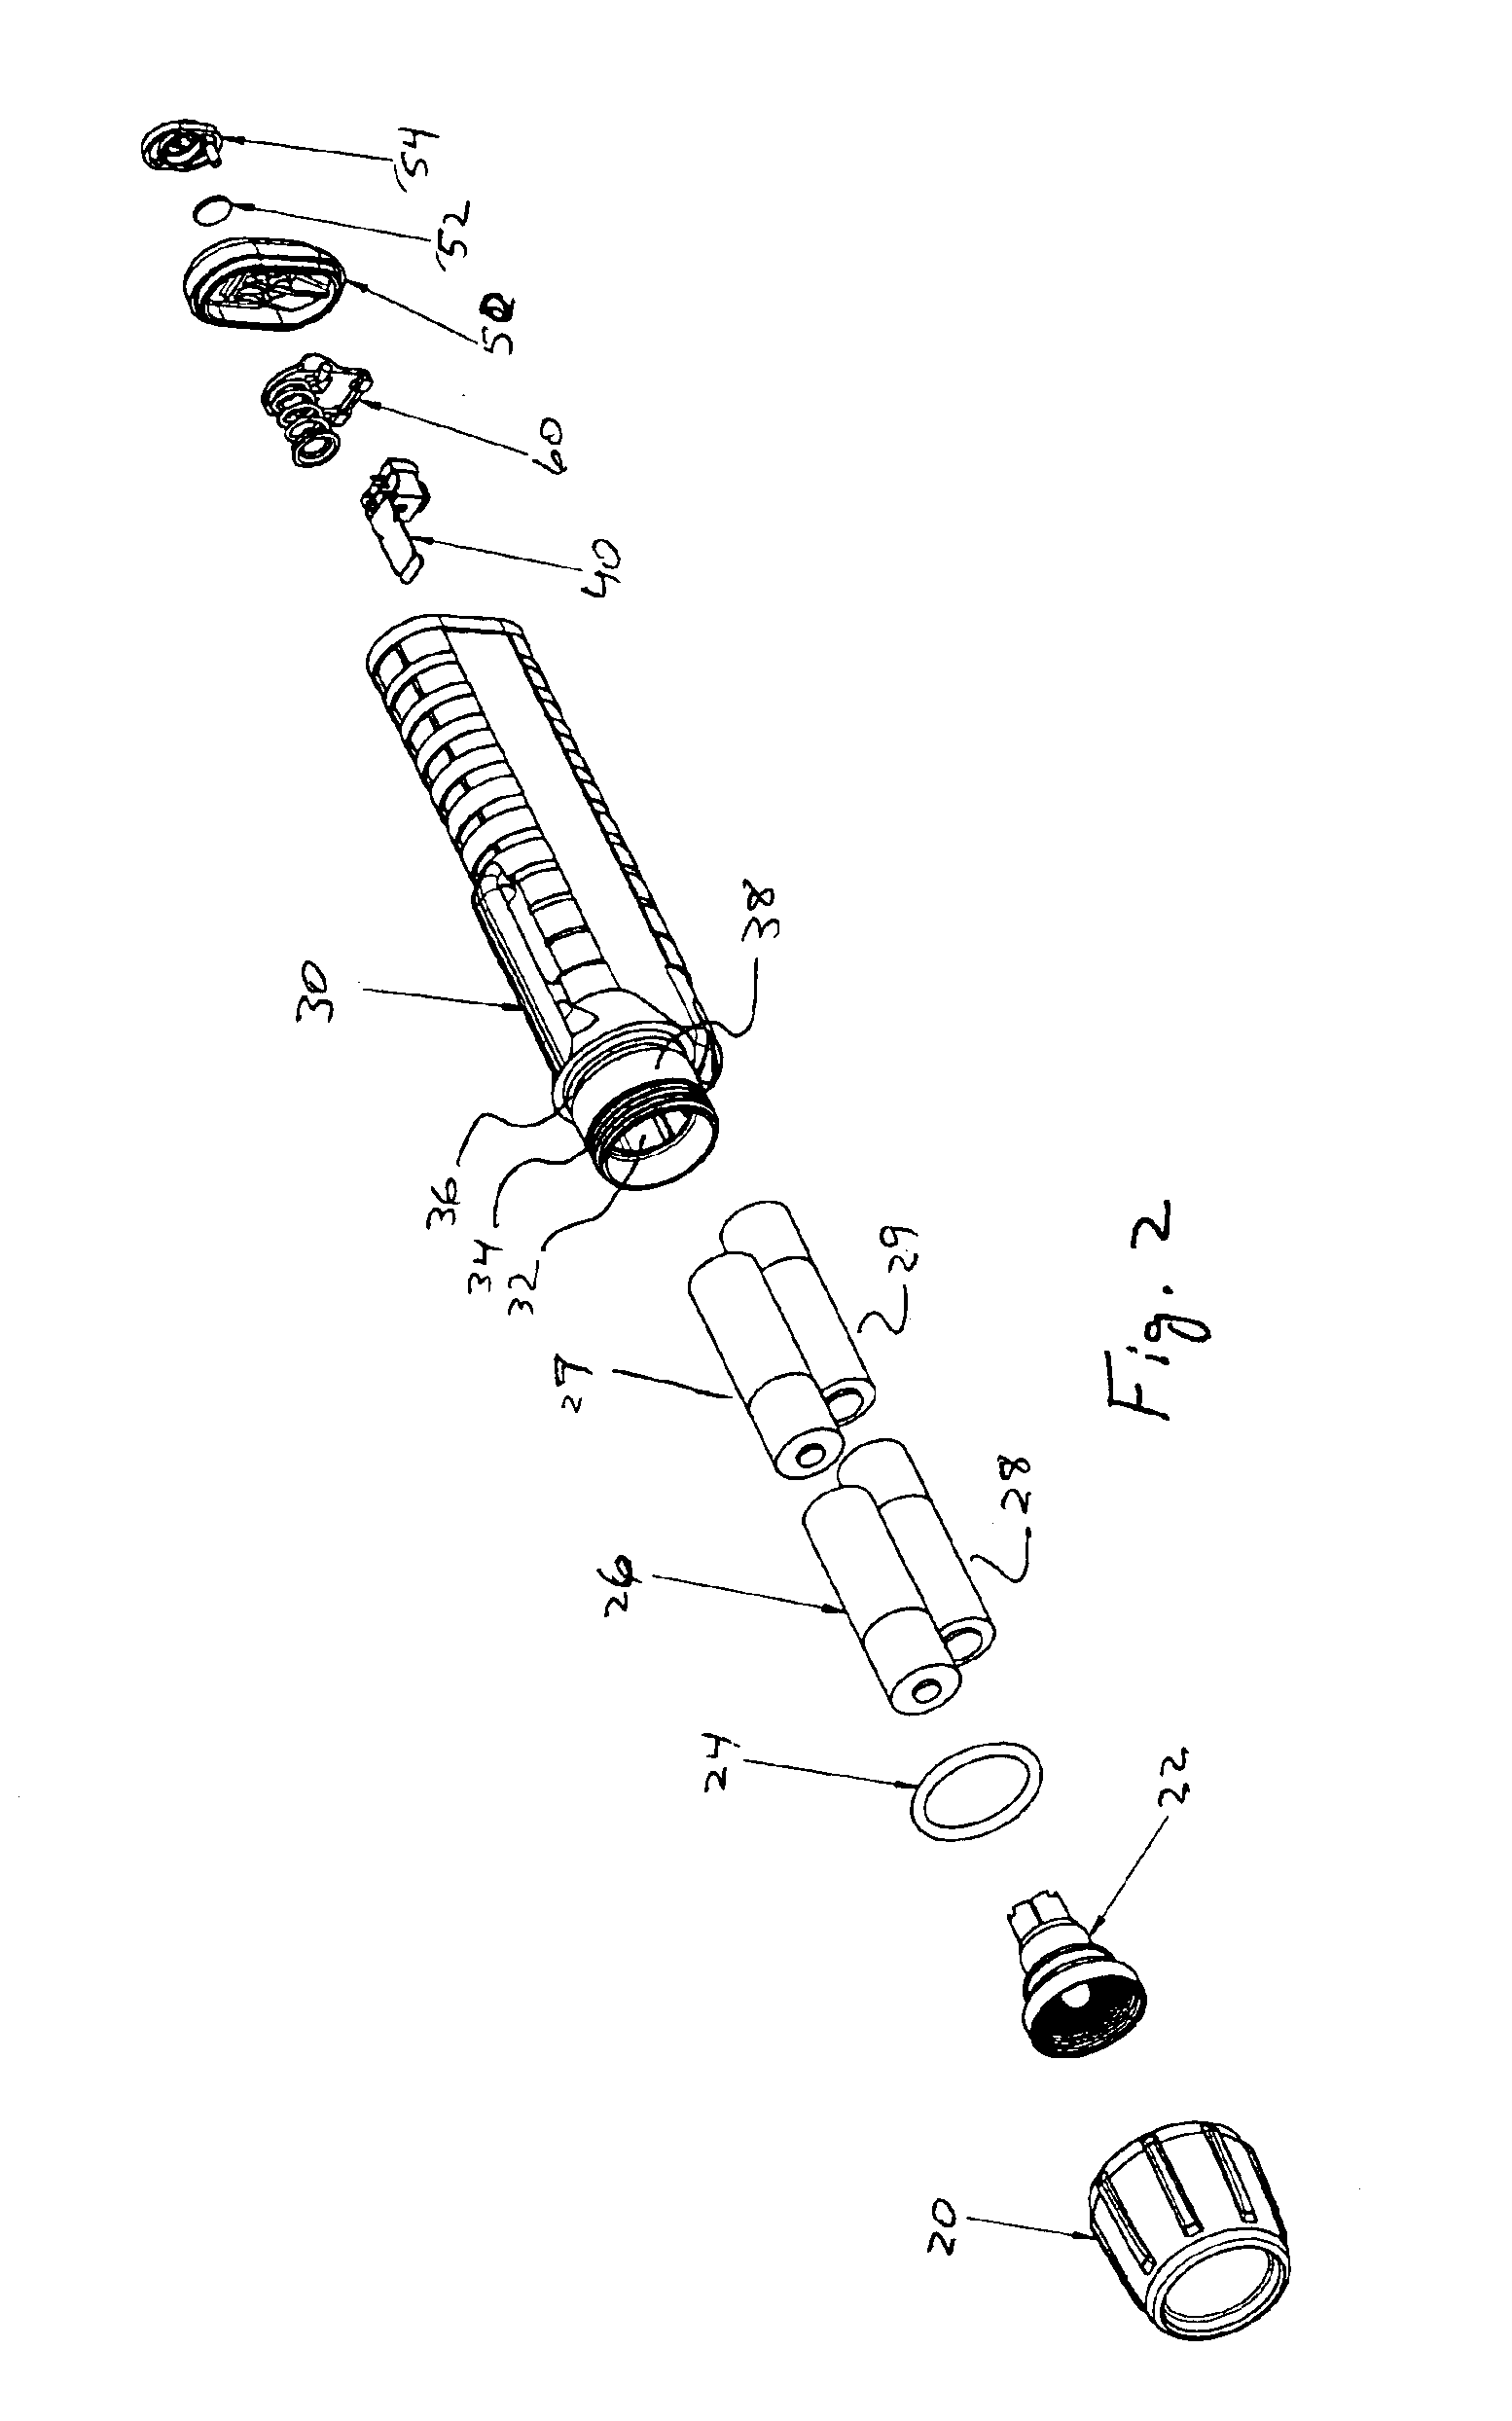 Flashlight with pivotable battery contact structure